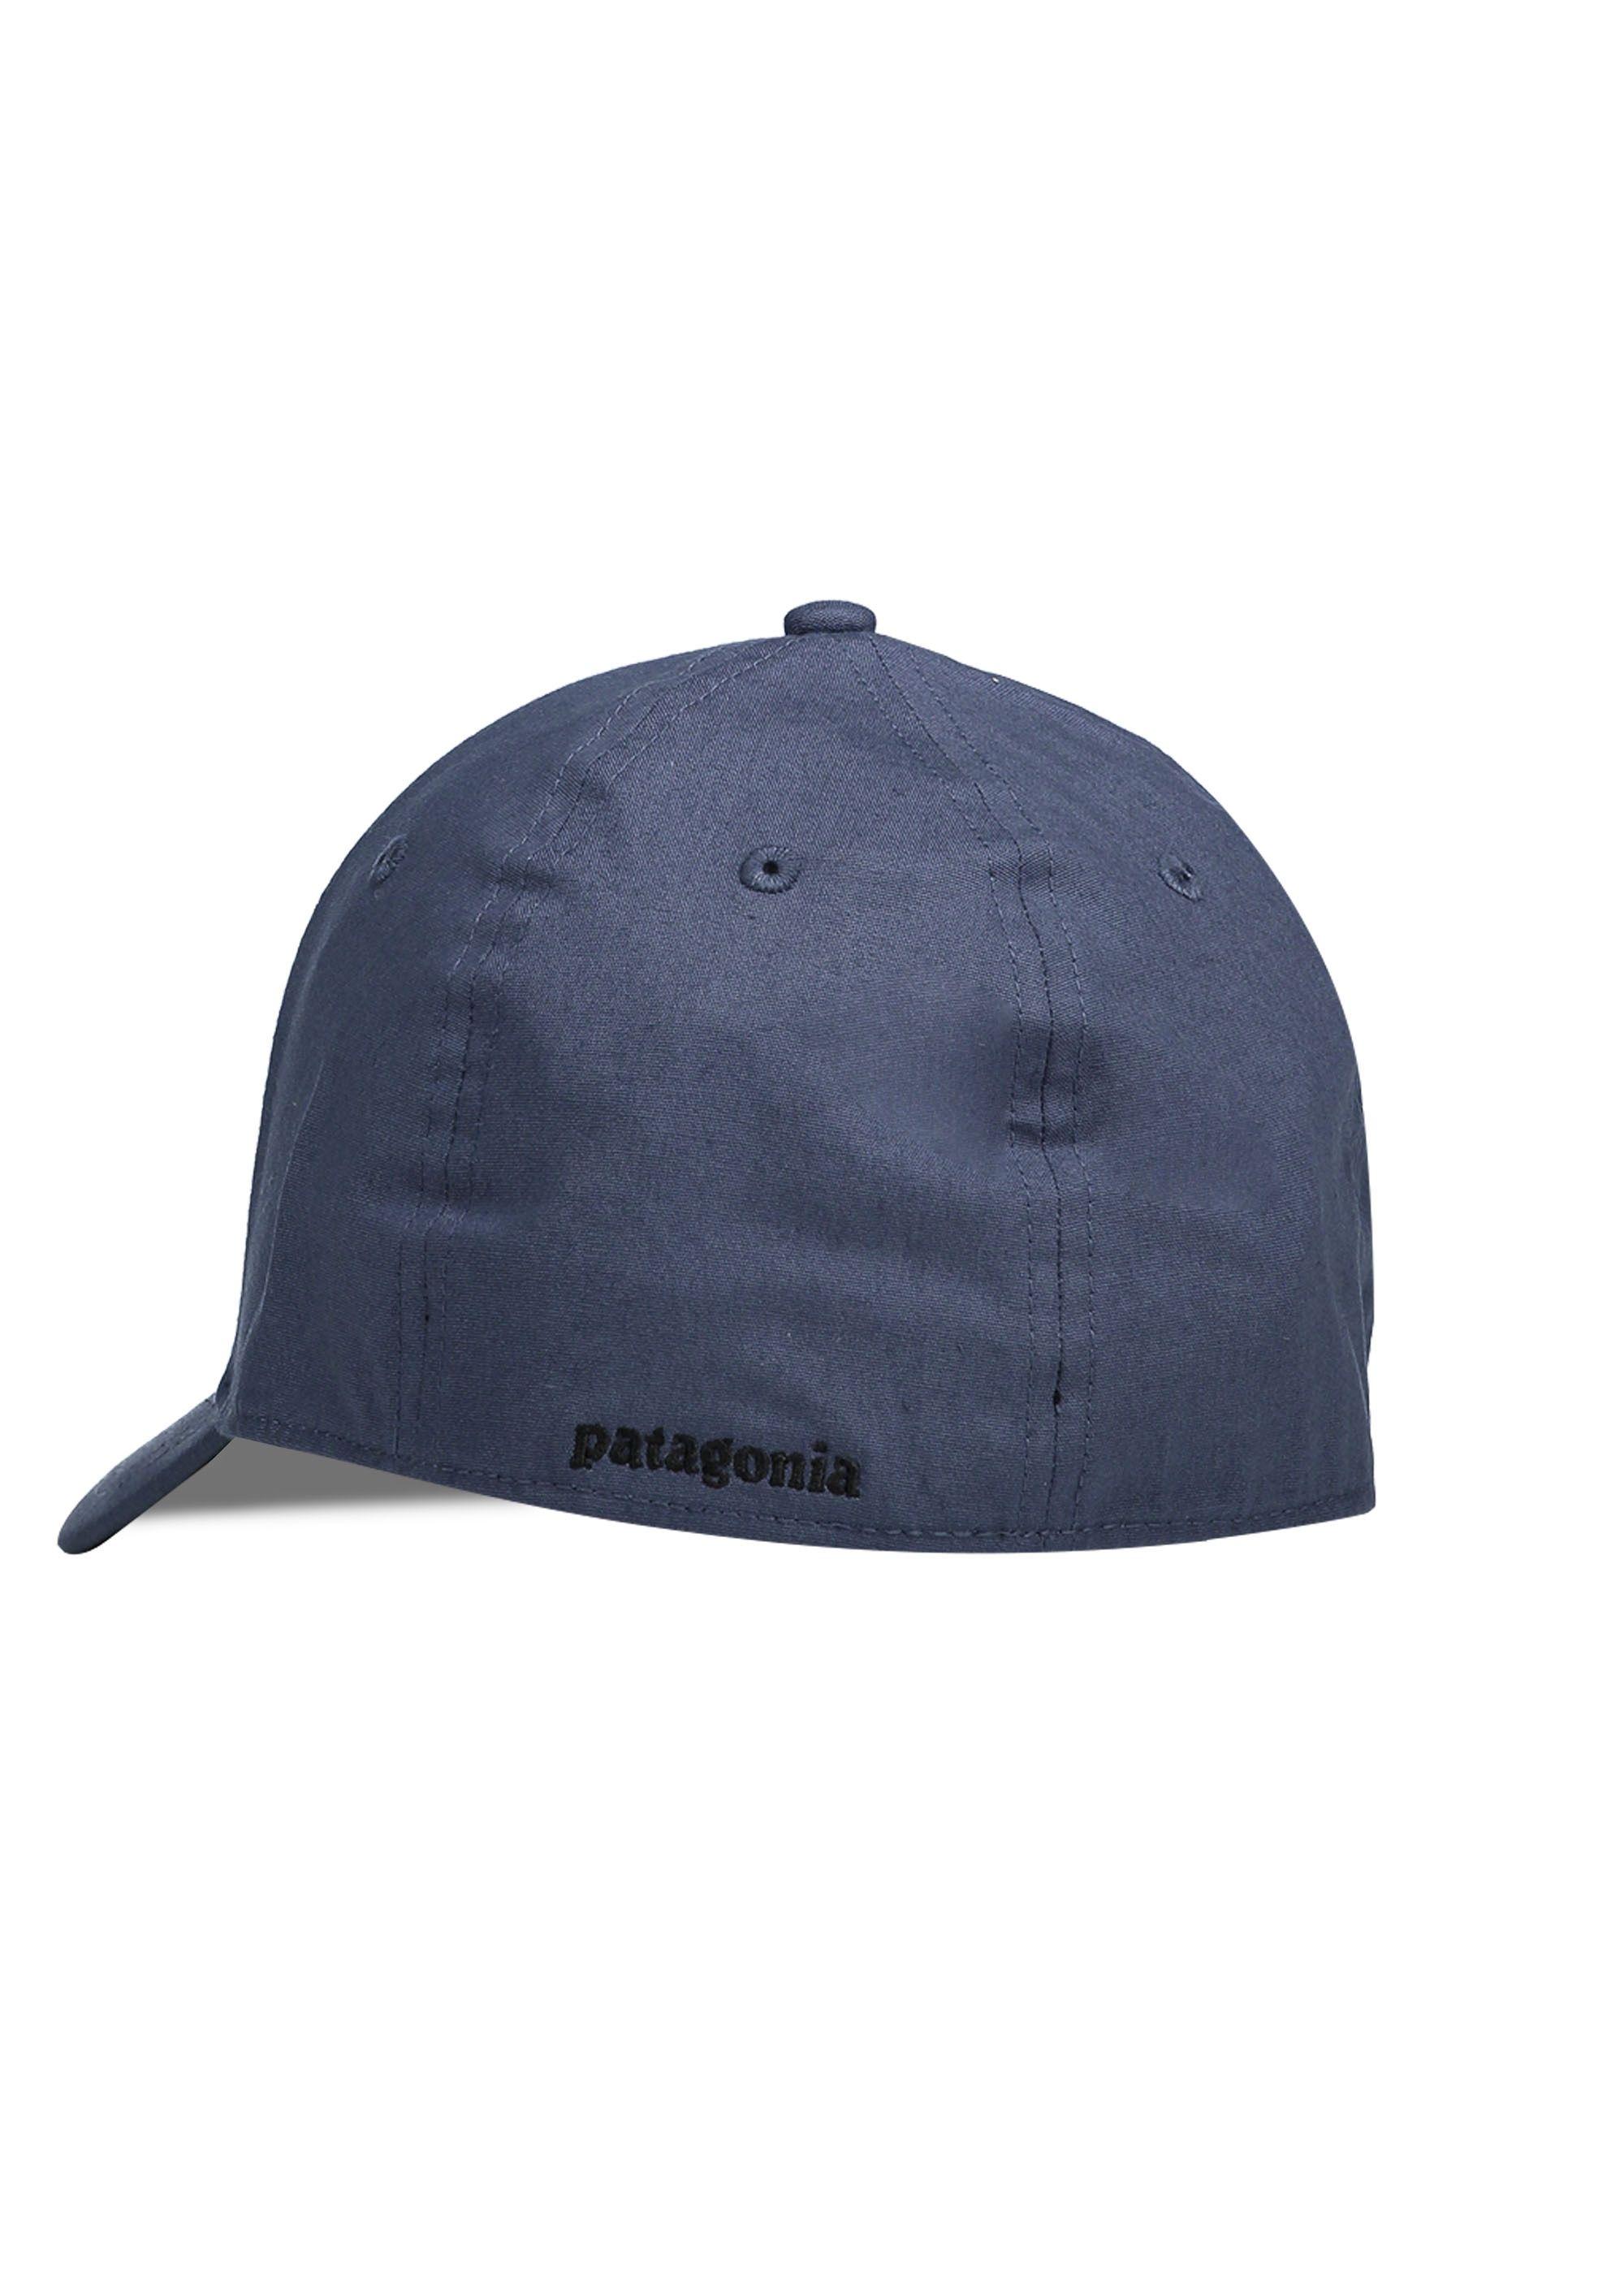 Who Has a Blue P Logo - Patagonia P-6 Logo Stretch Fit Hat - Dolomite Blue - Headwear from ...